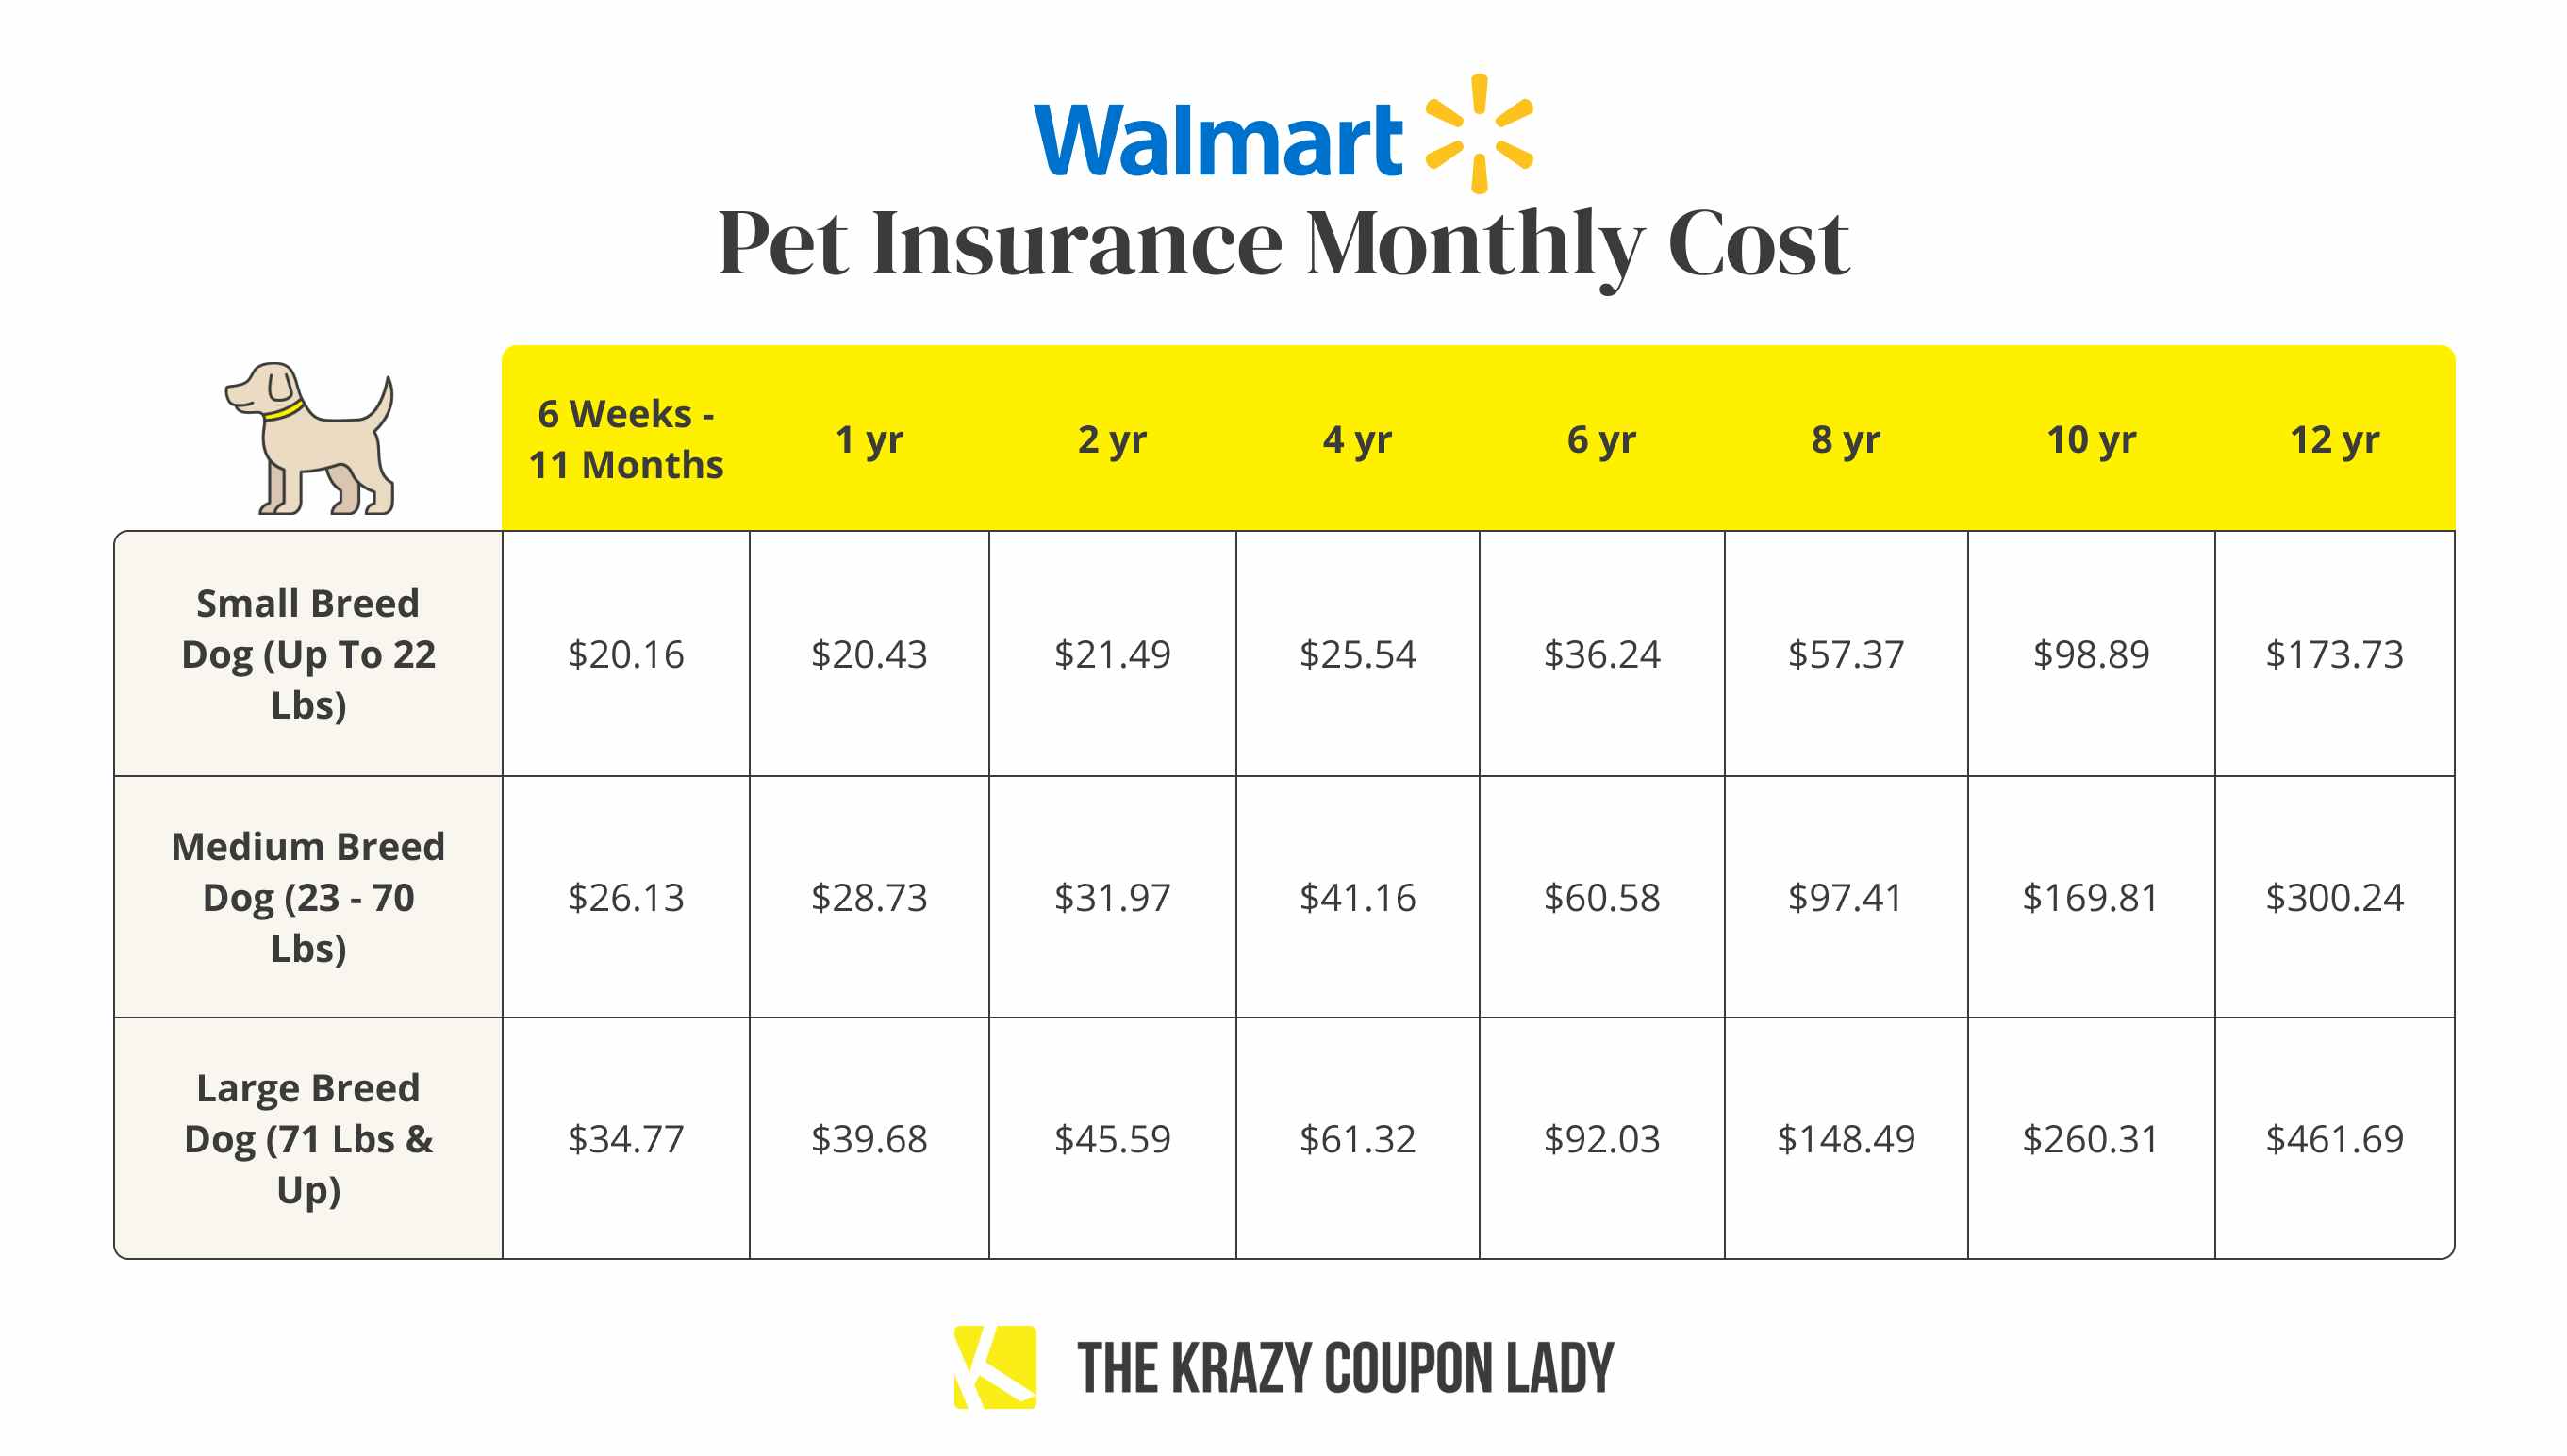 The monthly cost of Walmart Pet Care pet insurance for different breeds and ages of dogs.